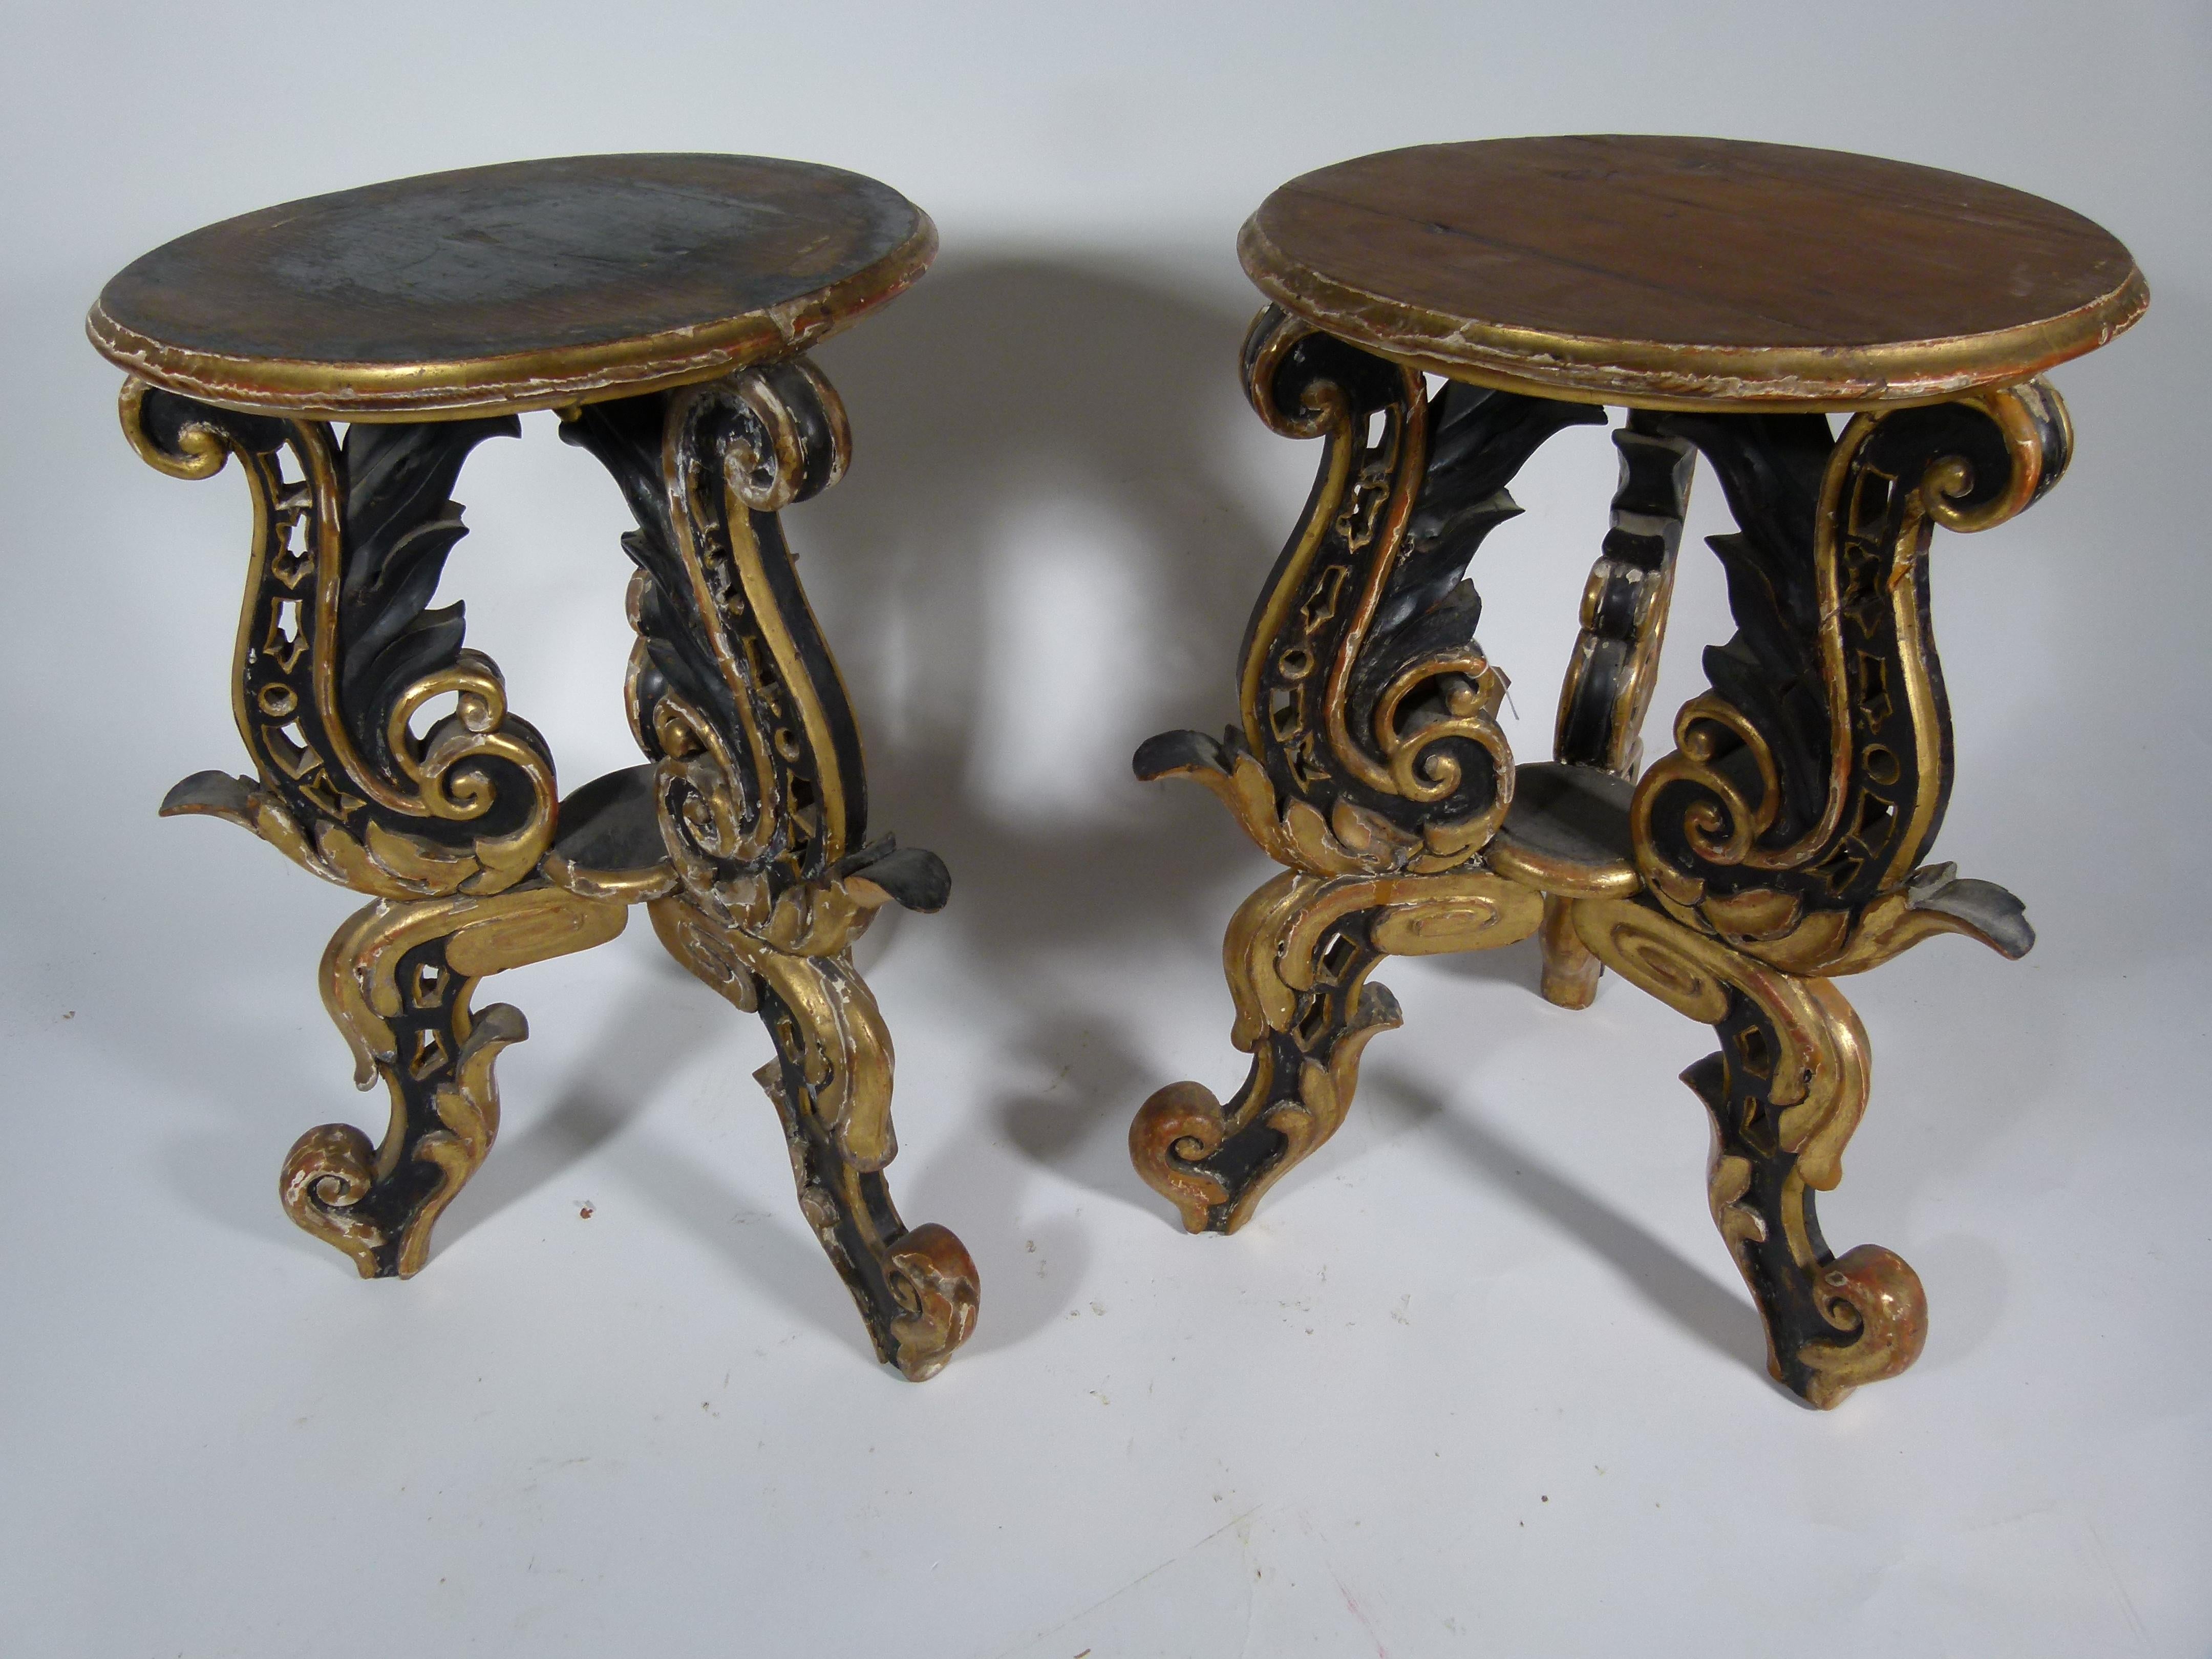 Spanish 18th century hand carved wooden and gold leaf decorations pair of side tables.